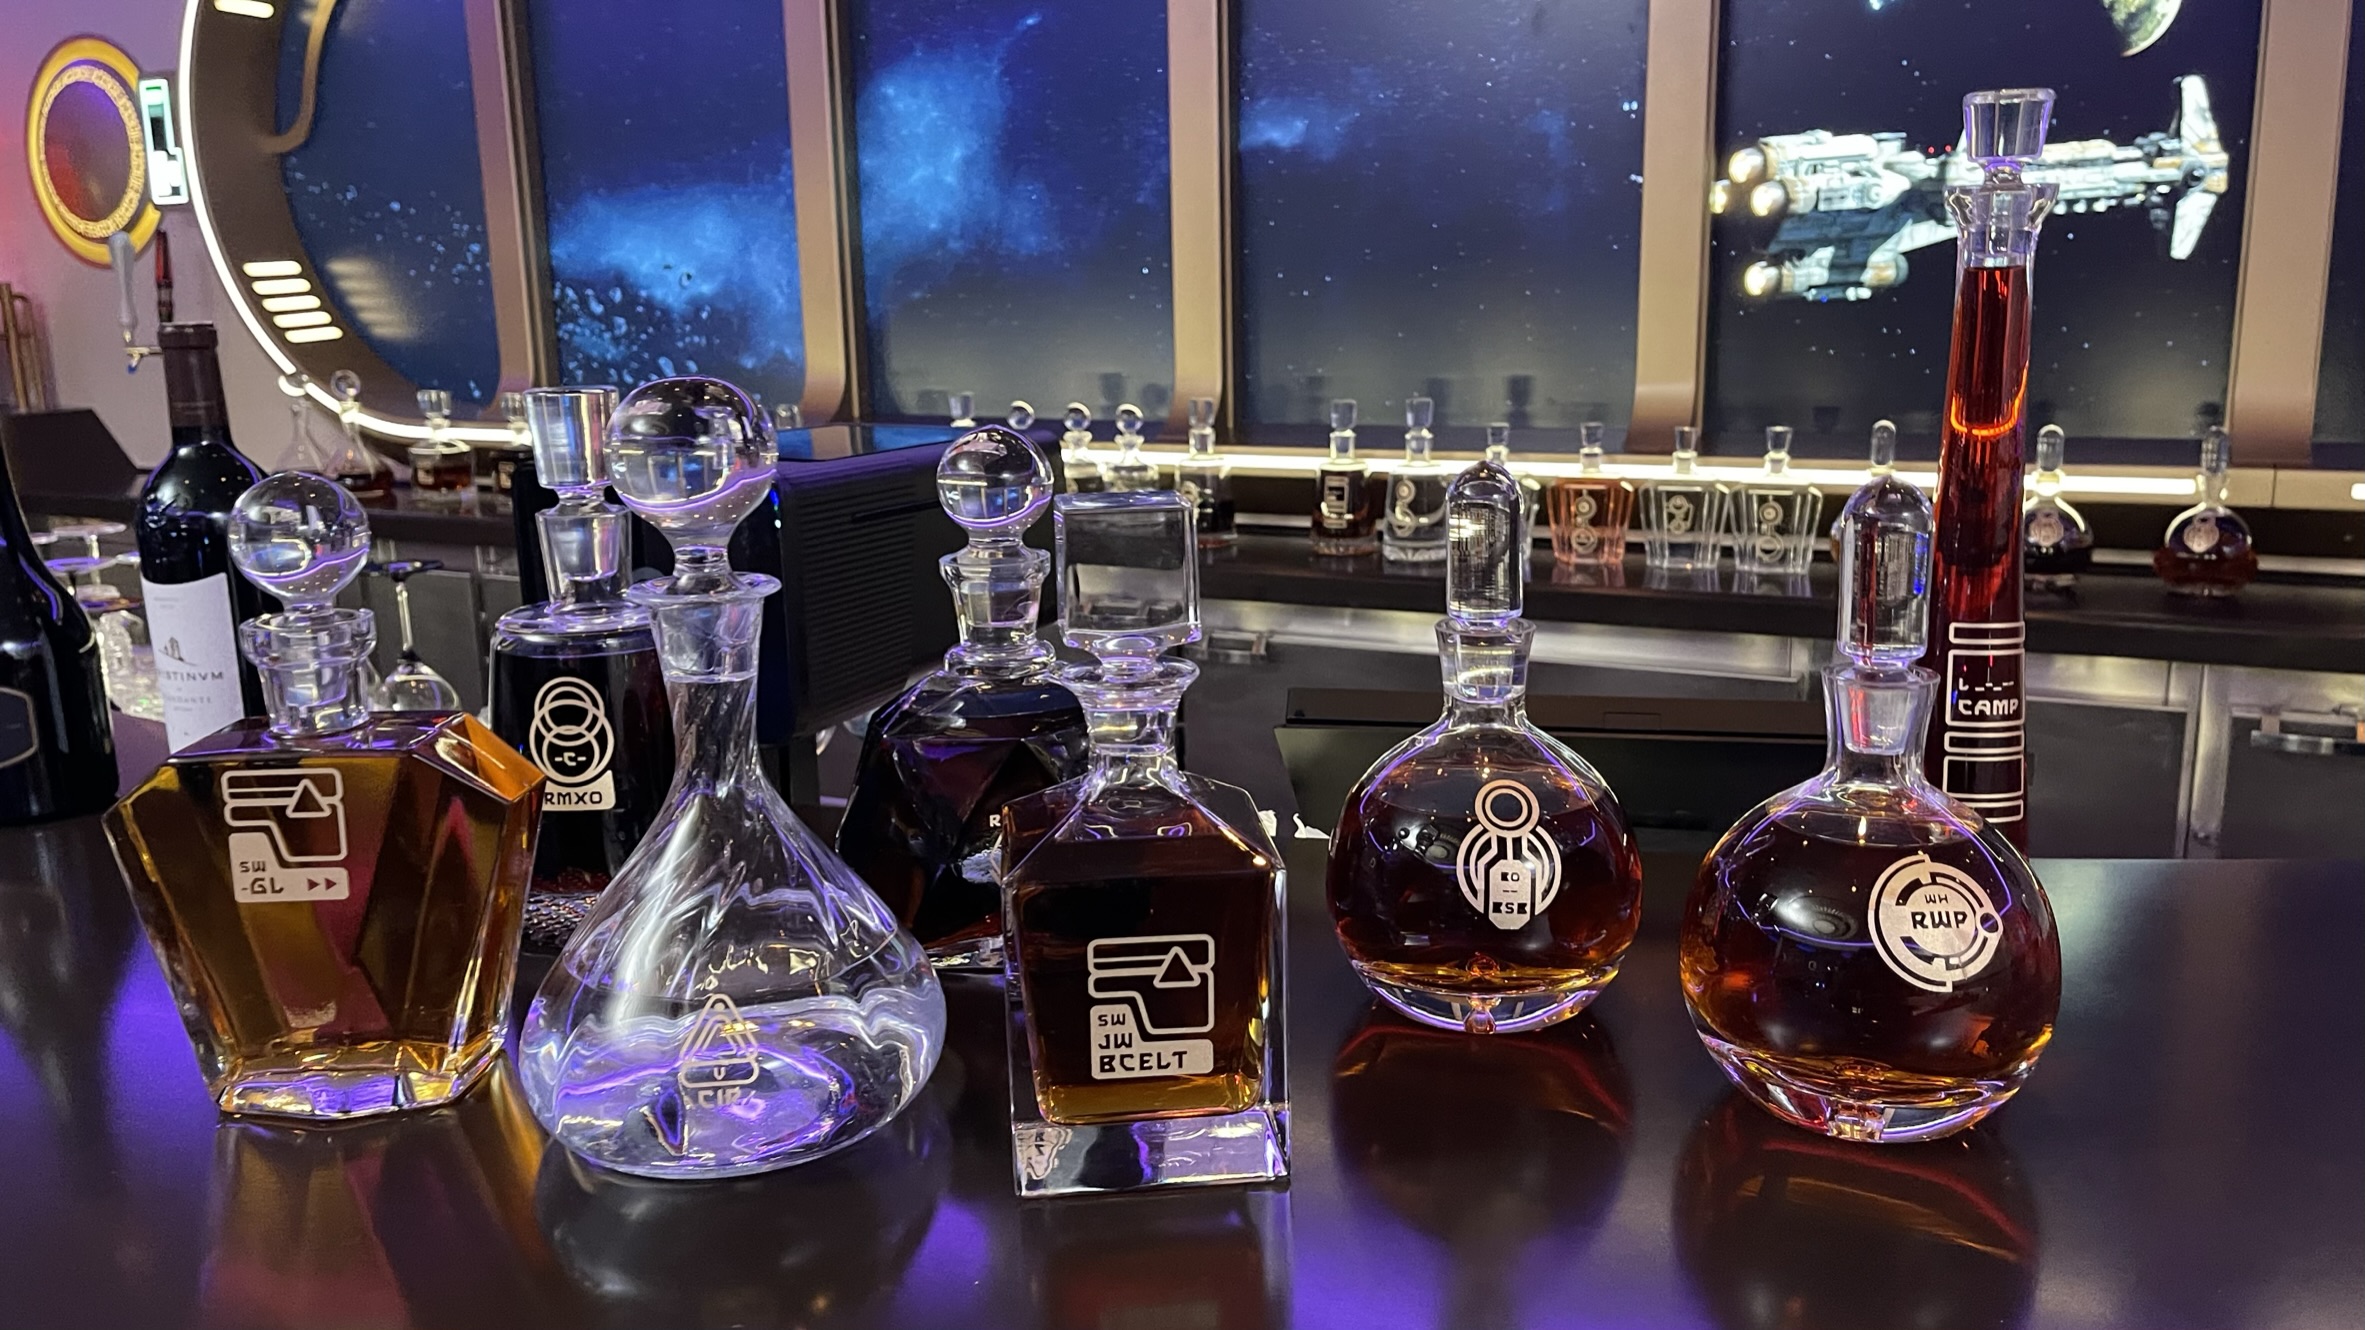 The Disney Wish | Star Wars Hyperspace Lounge | Collection of Star Wars Inspired drink vessels